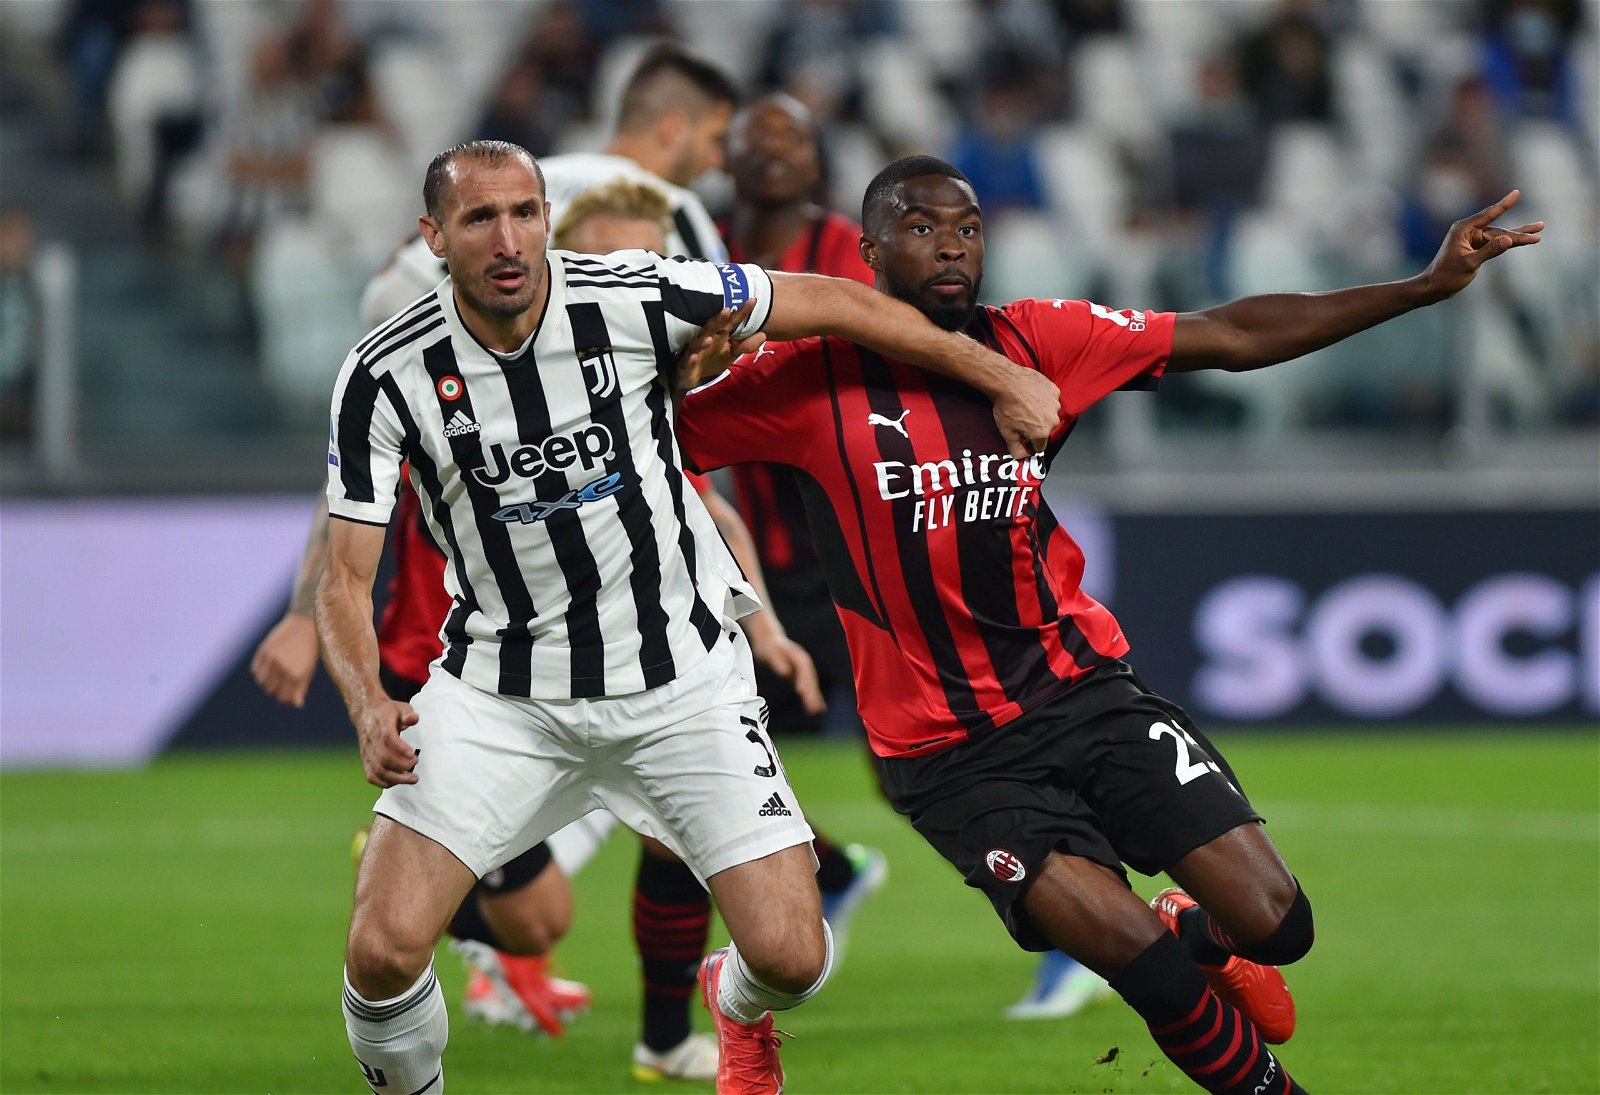 Milan juventus betting preview better place battery switch station